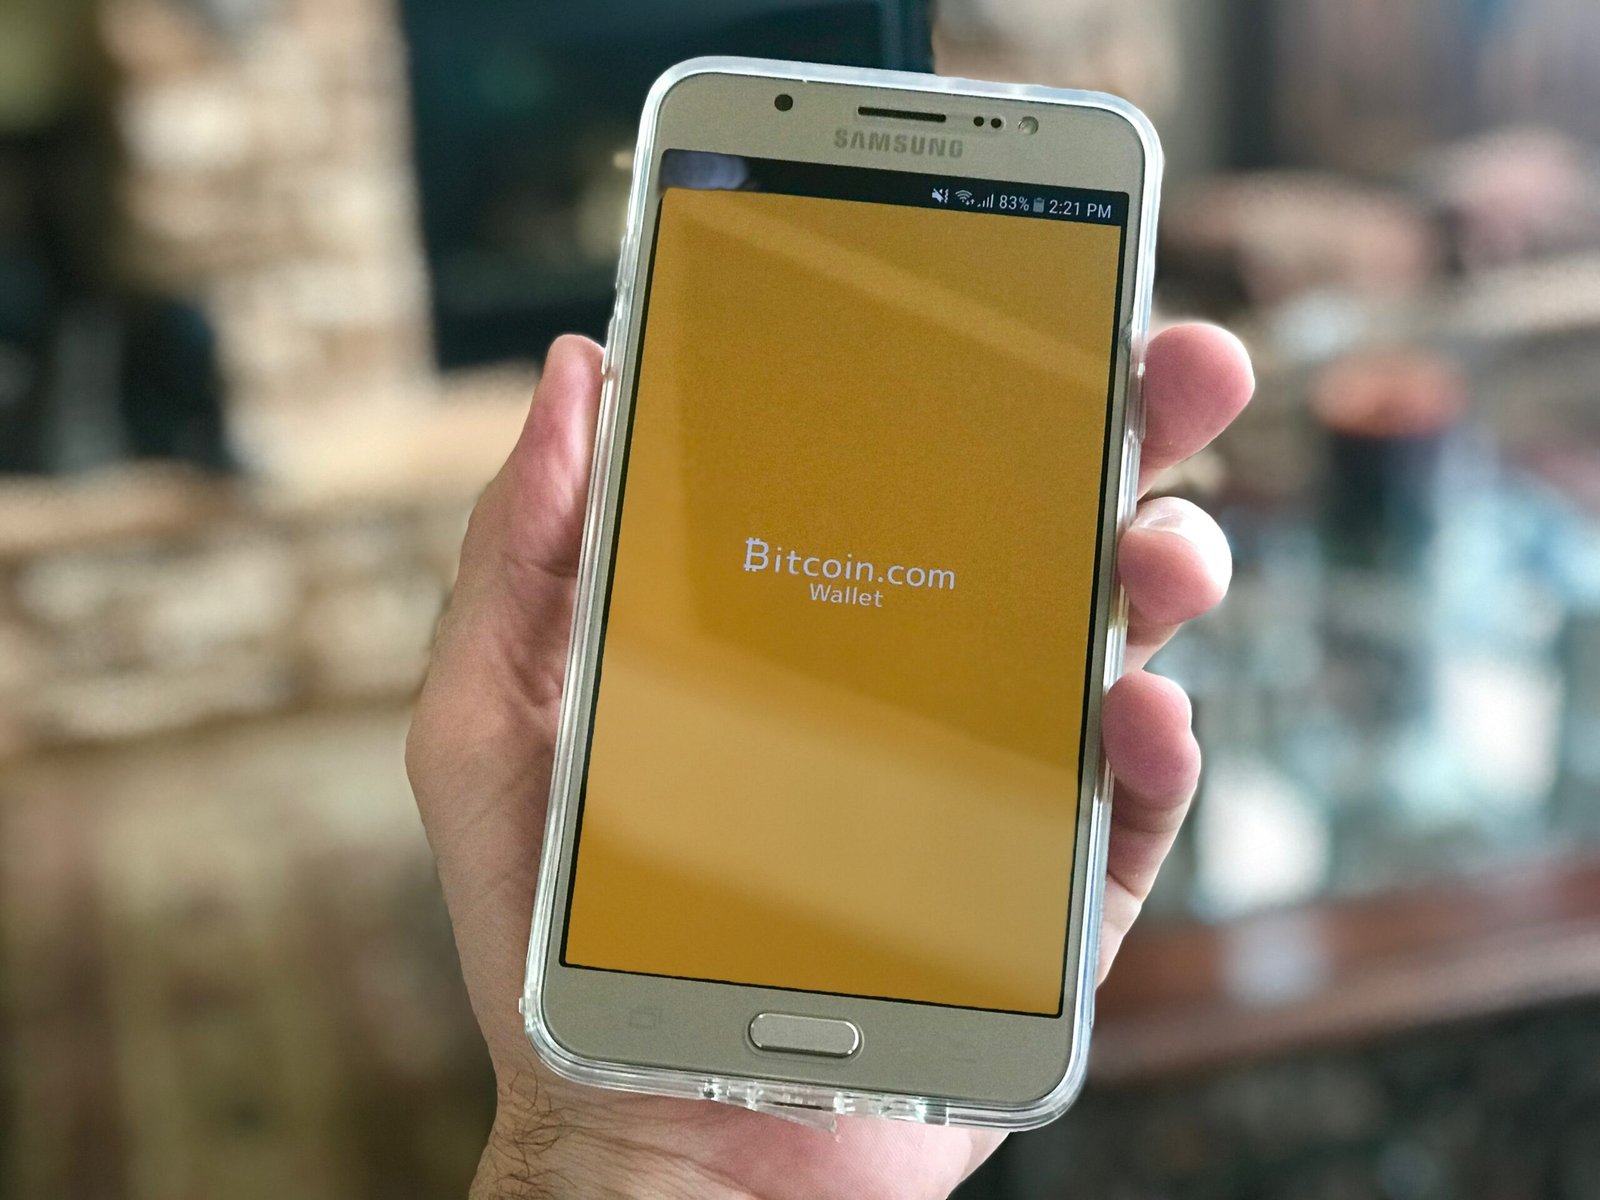 How to Mine Bitcoin from Your Smartphone?